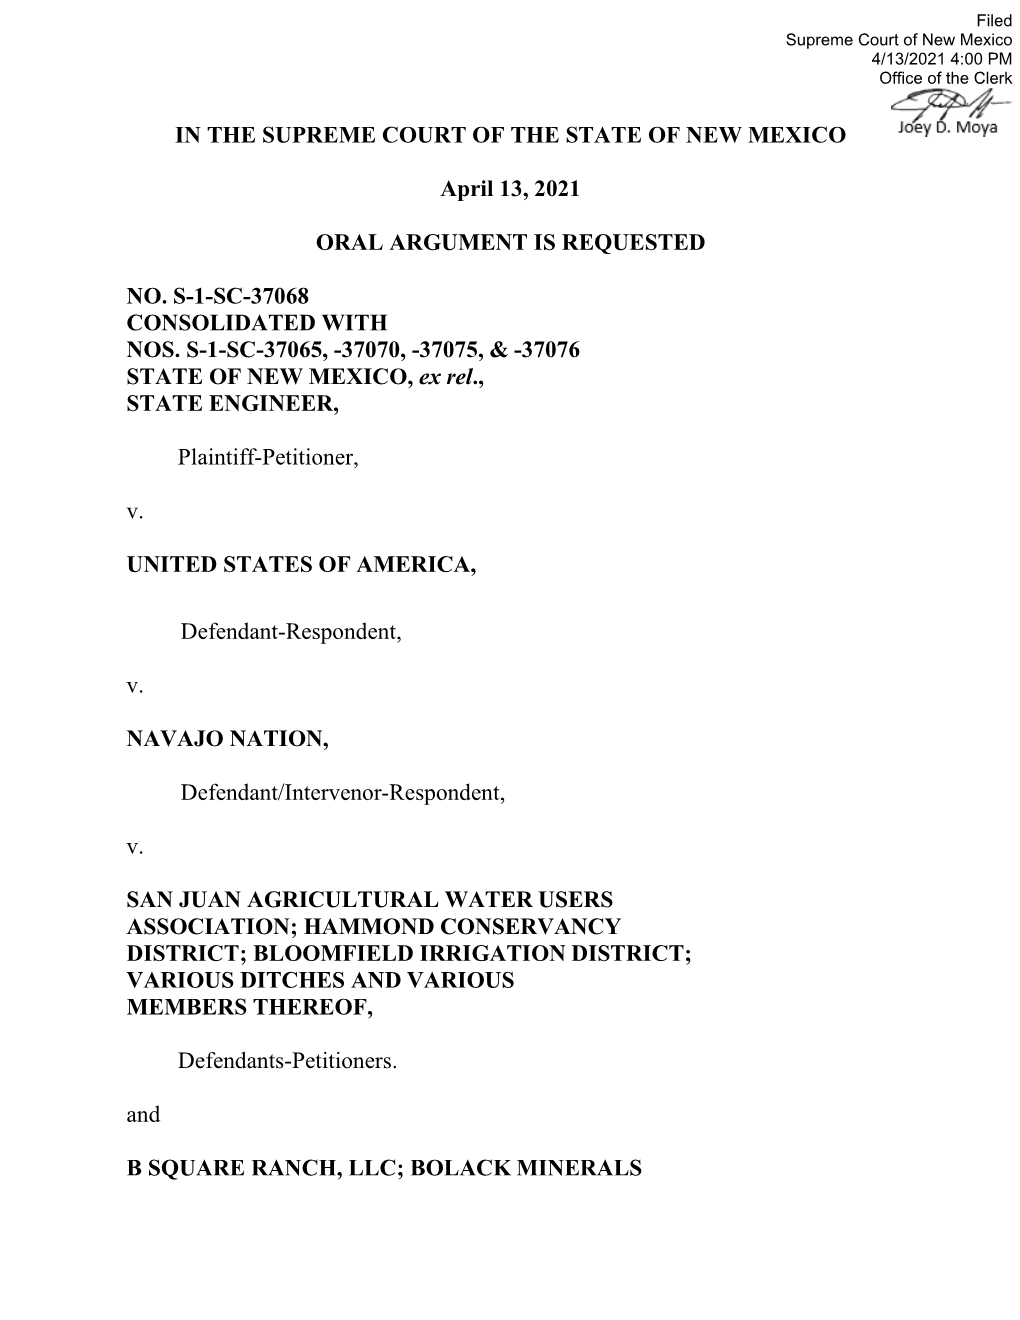 IN the SUPREME COURT of the STATE of NEW MEXICO April 13, 2021 ORAL ARGUMENT IS REQUESTED NO. S-1-SC-37068 CONSOLIDATED WITH